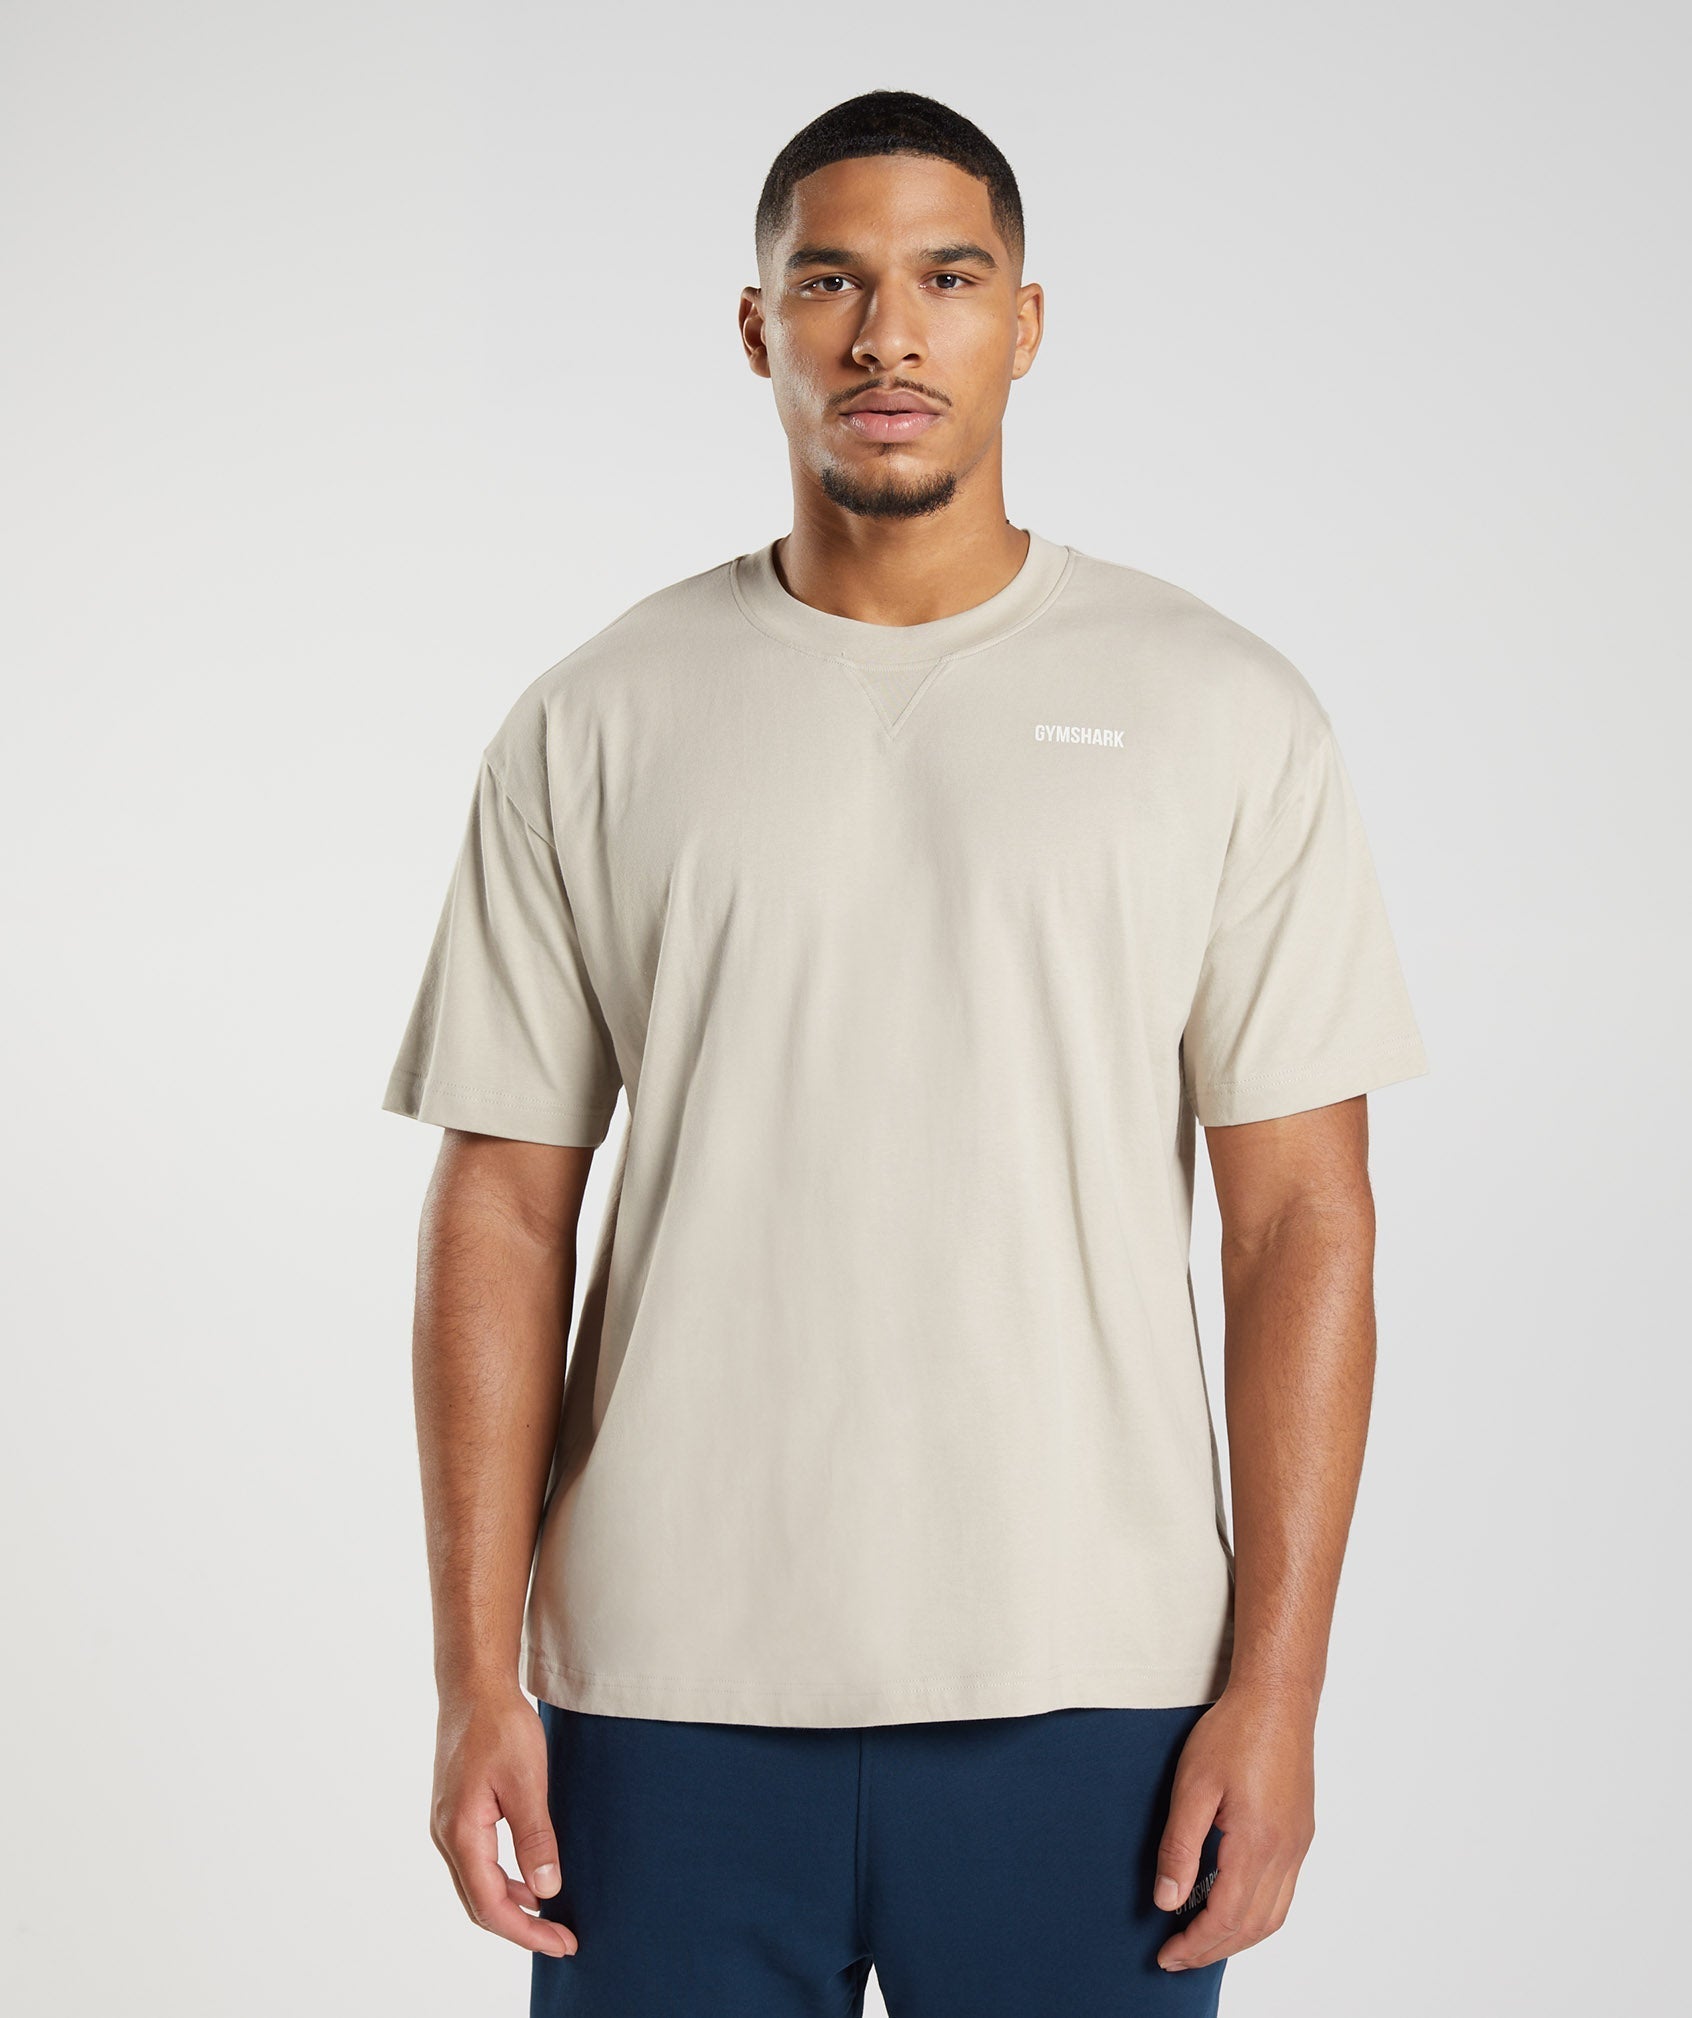 Rest Day Sweats T-Shirt in Pebble Grey - view 2